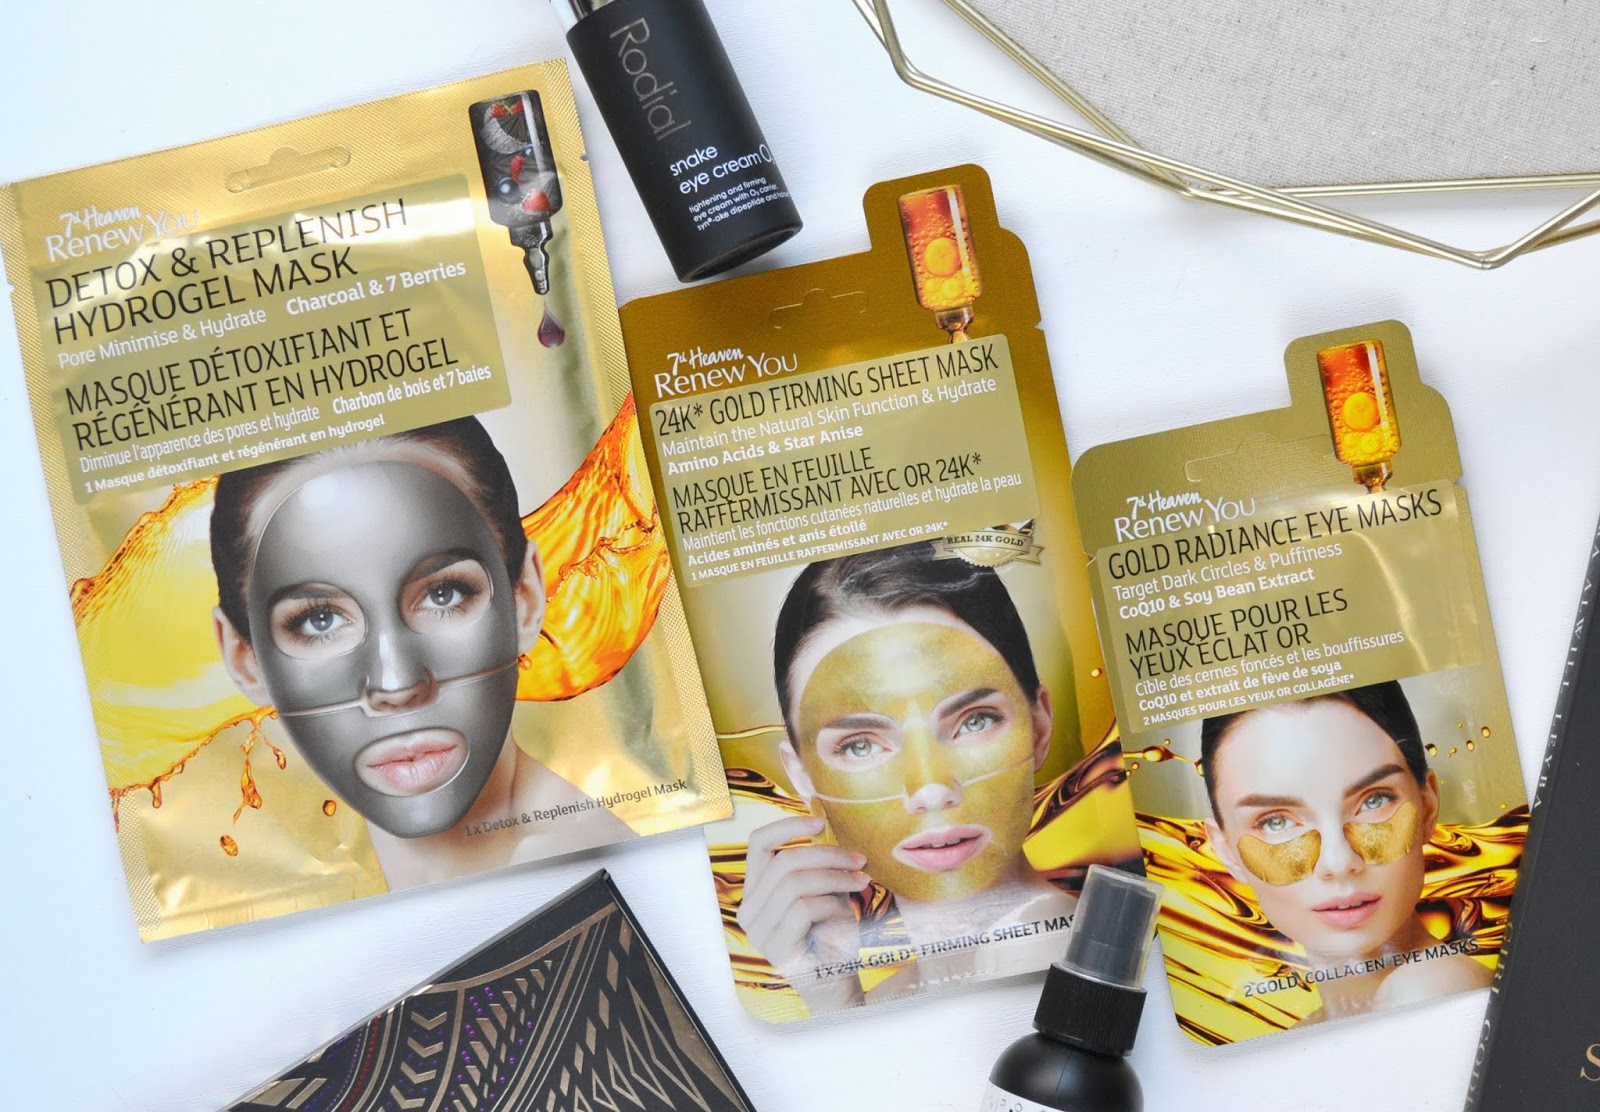 SHEET MASKS 7th Heaven Renew You 24K Gold and Charcoal Hydrogel Masks | Cosmetic Proof | Vancouver beauty, nail art and lifestyle blog